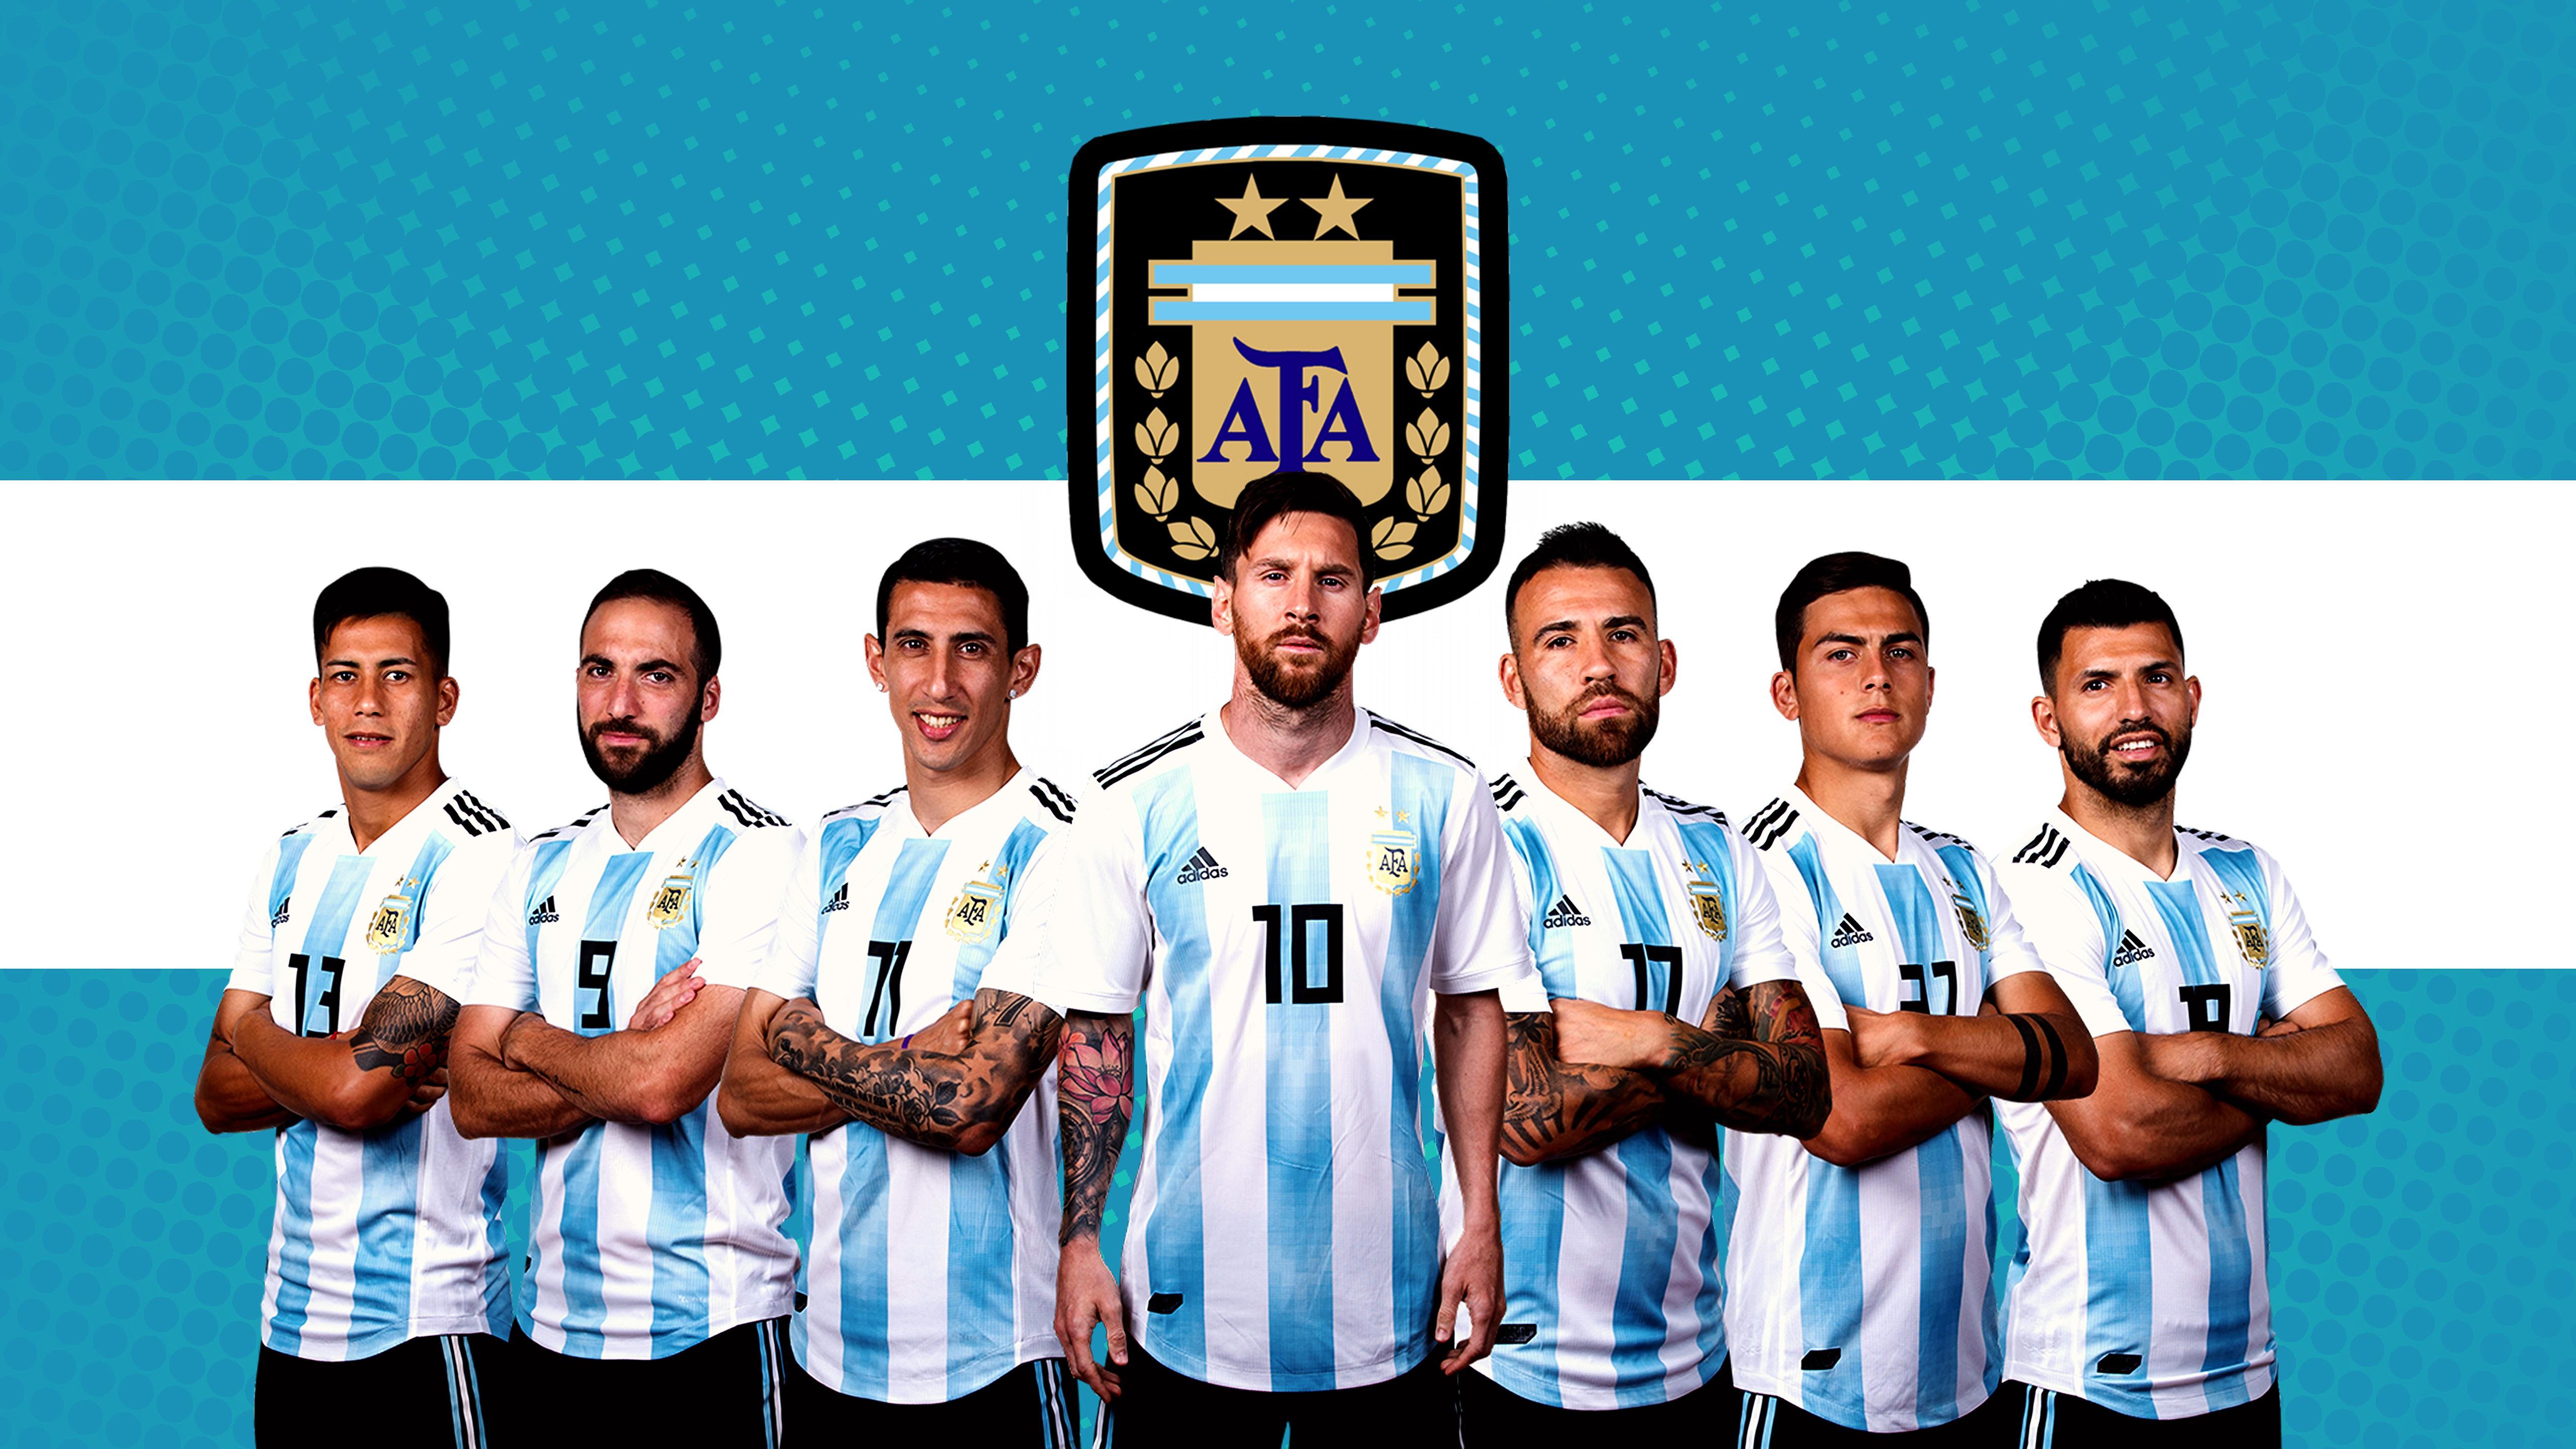 Argentina National Football Team Wallpapers Backgrounds For Free | The ...